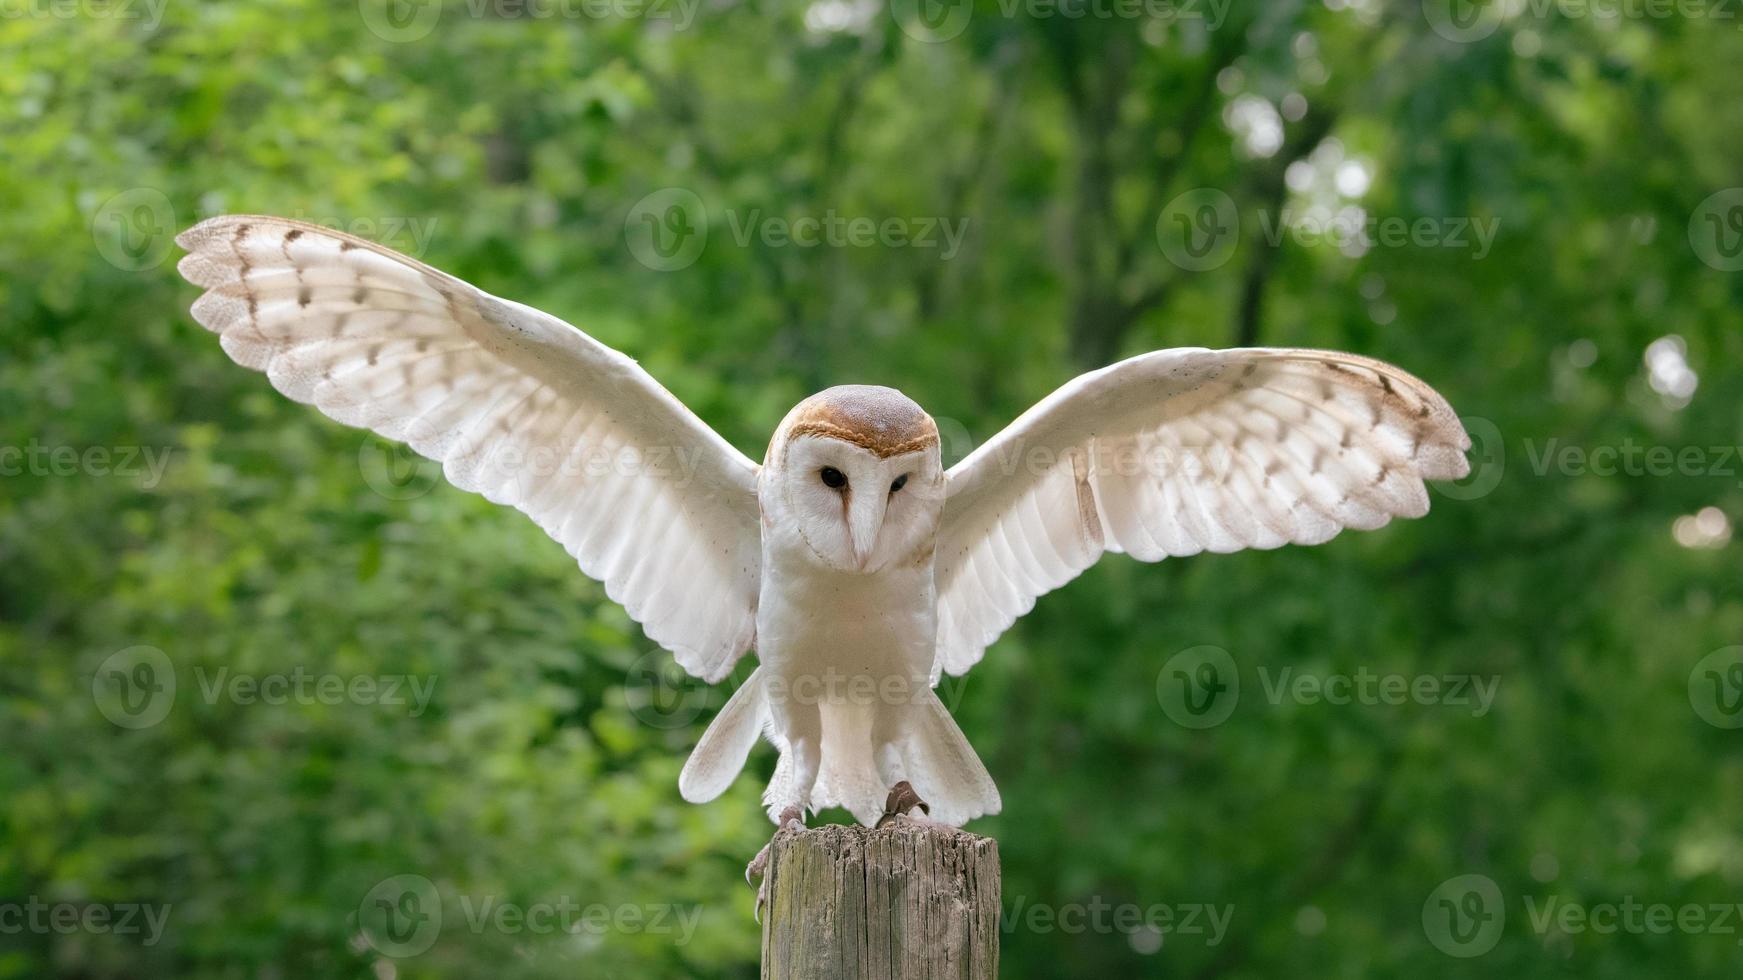 A widescreen image of a white owl with wings extended. photo